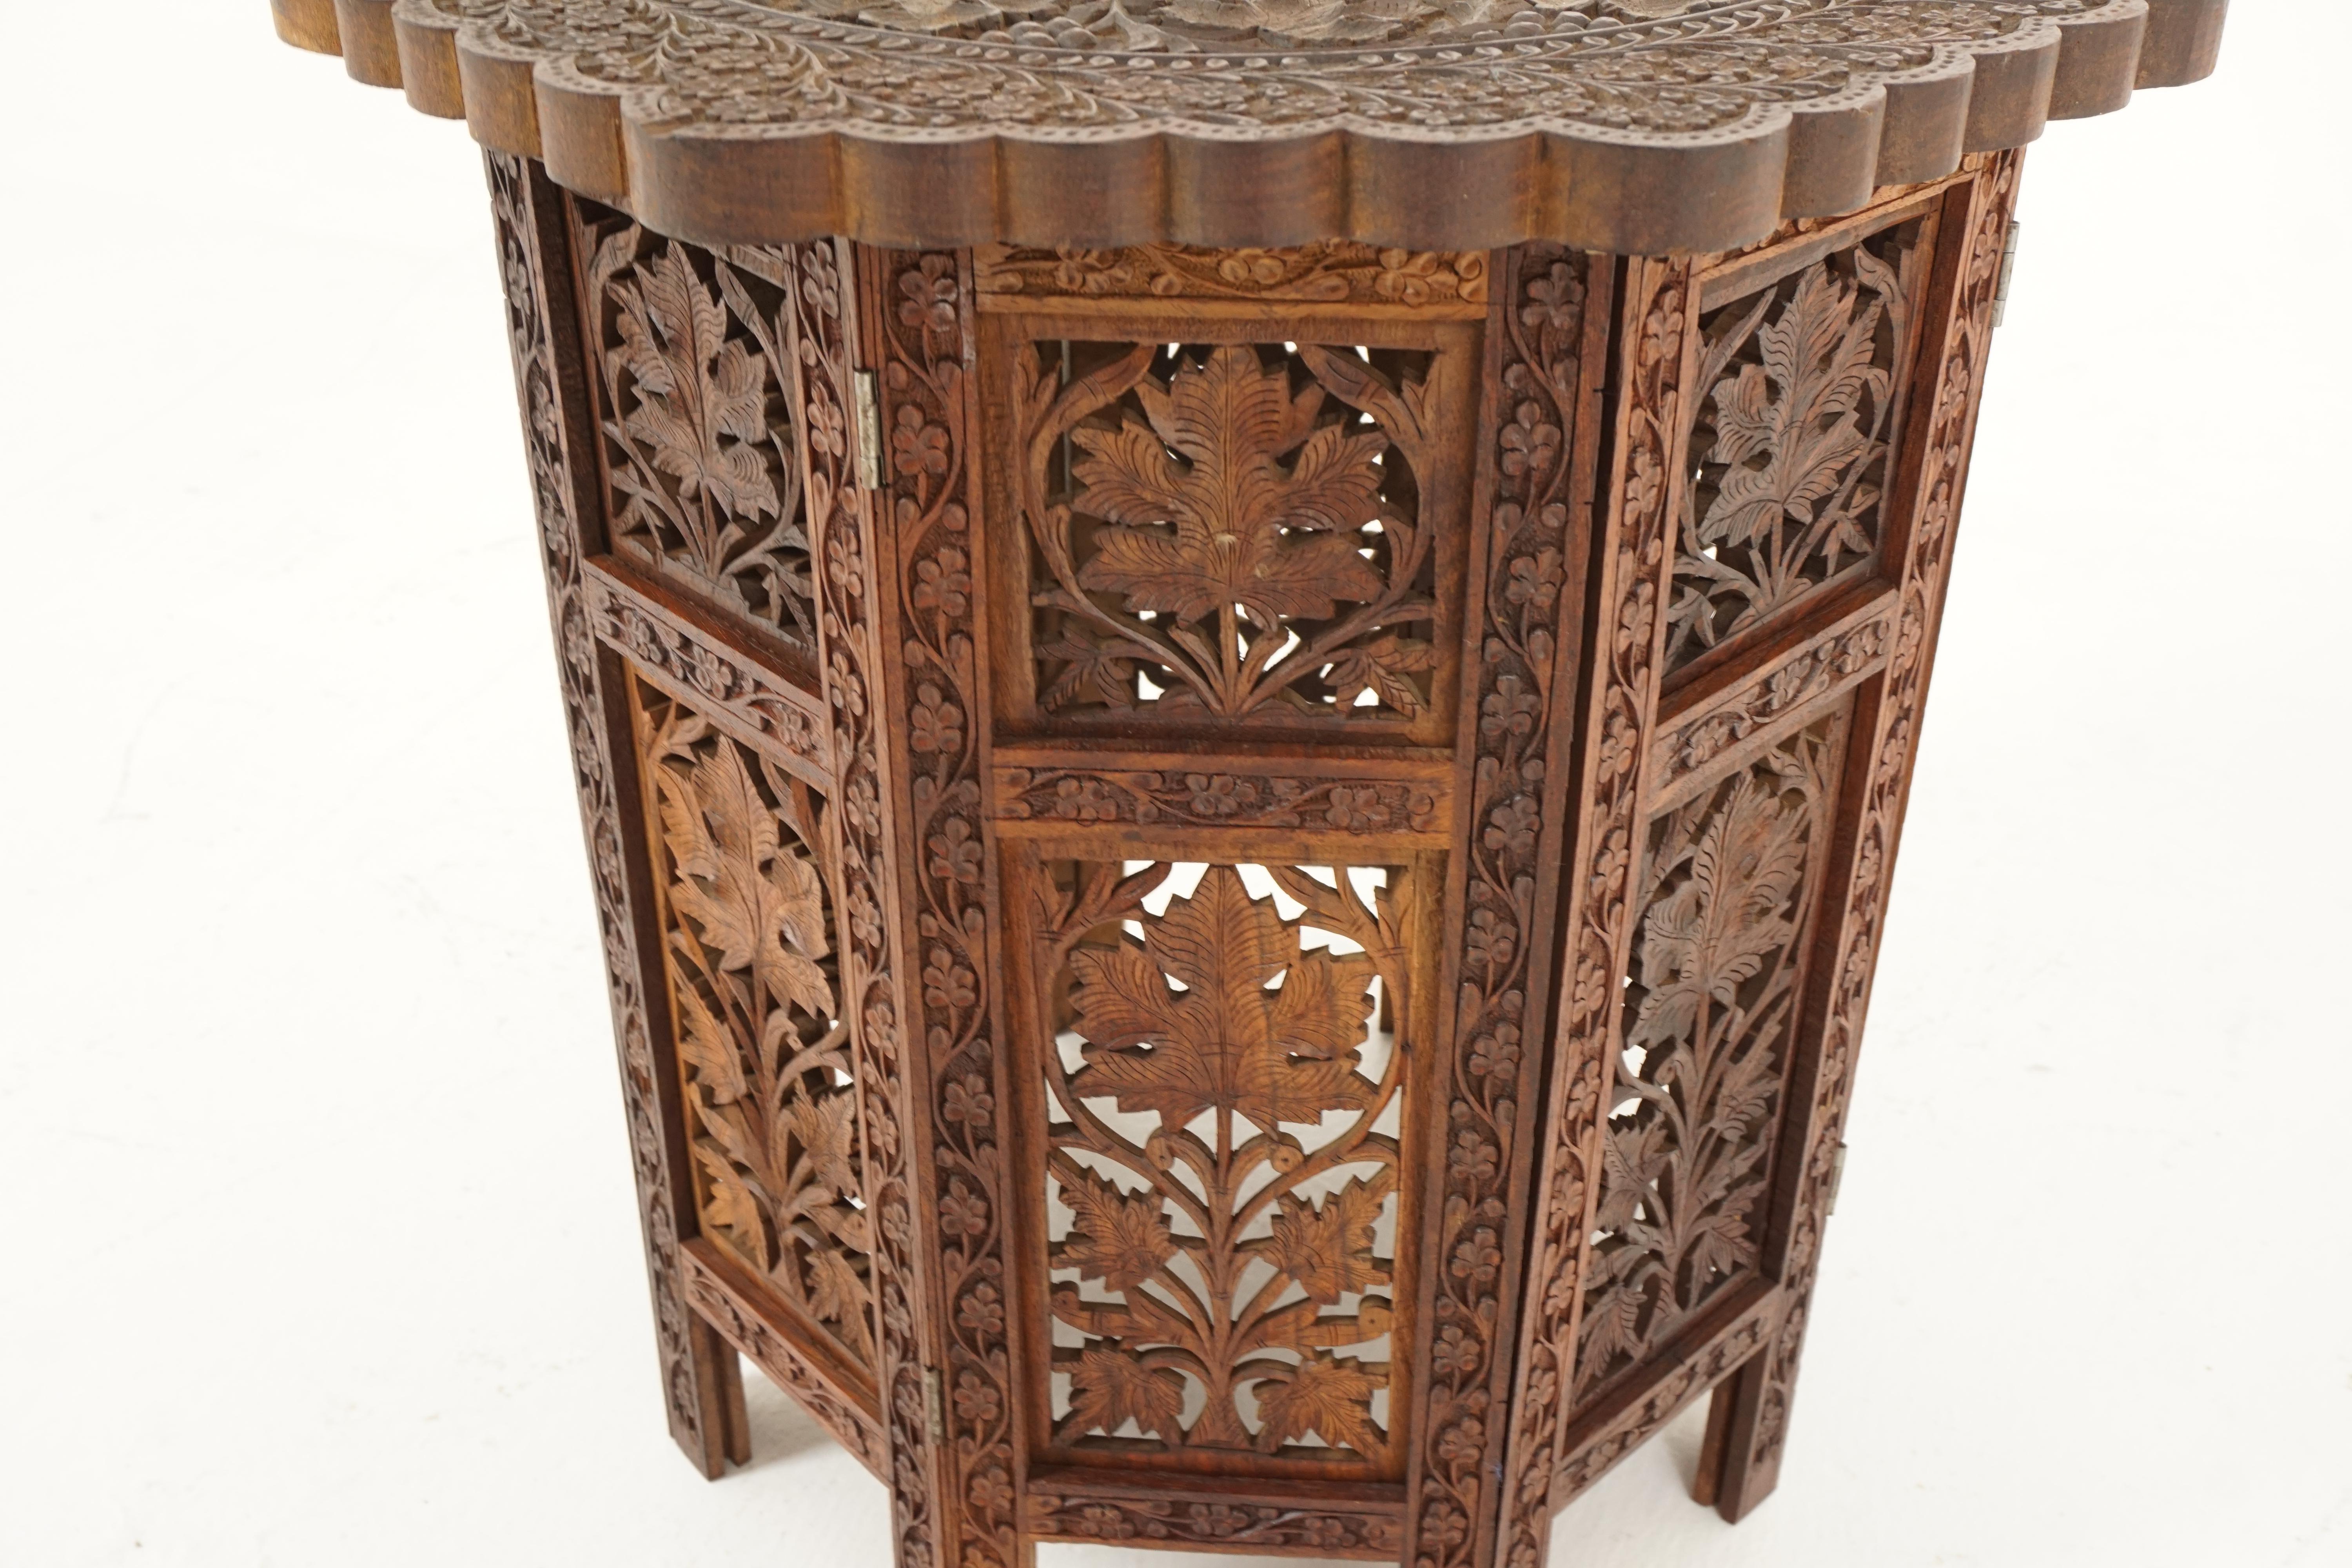 Indian Antique Teak Table, Carved Campaign Table, Inlaid Table, India, 1920s